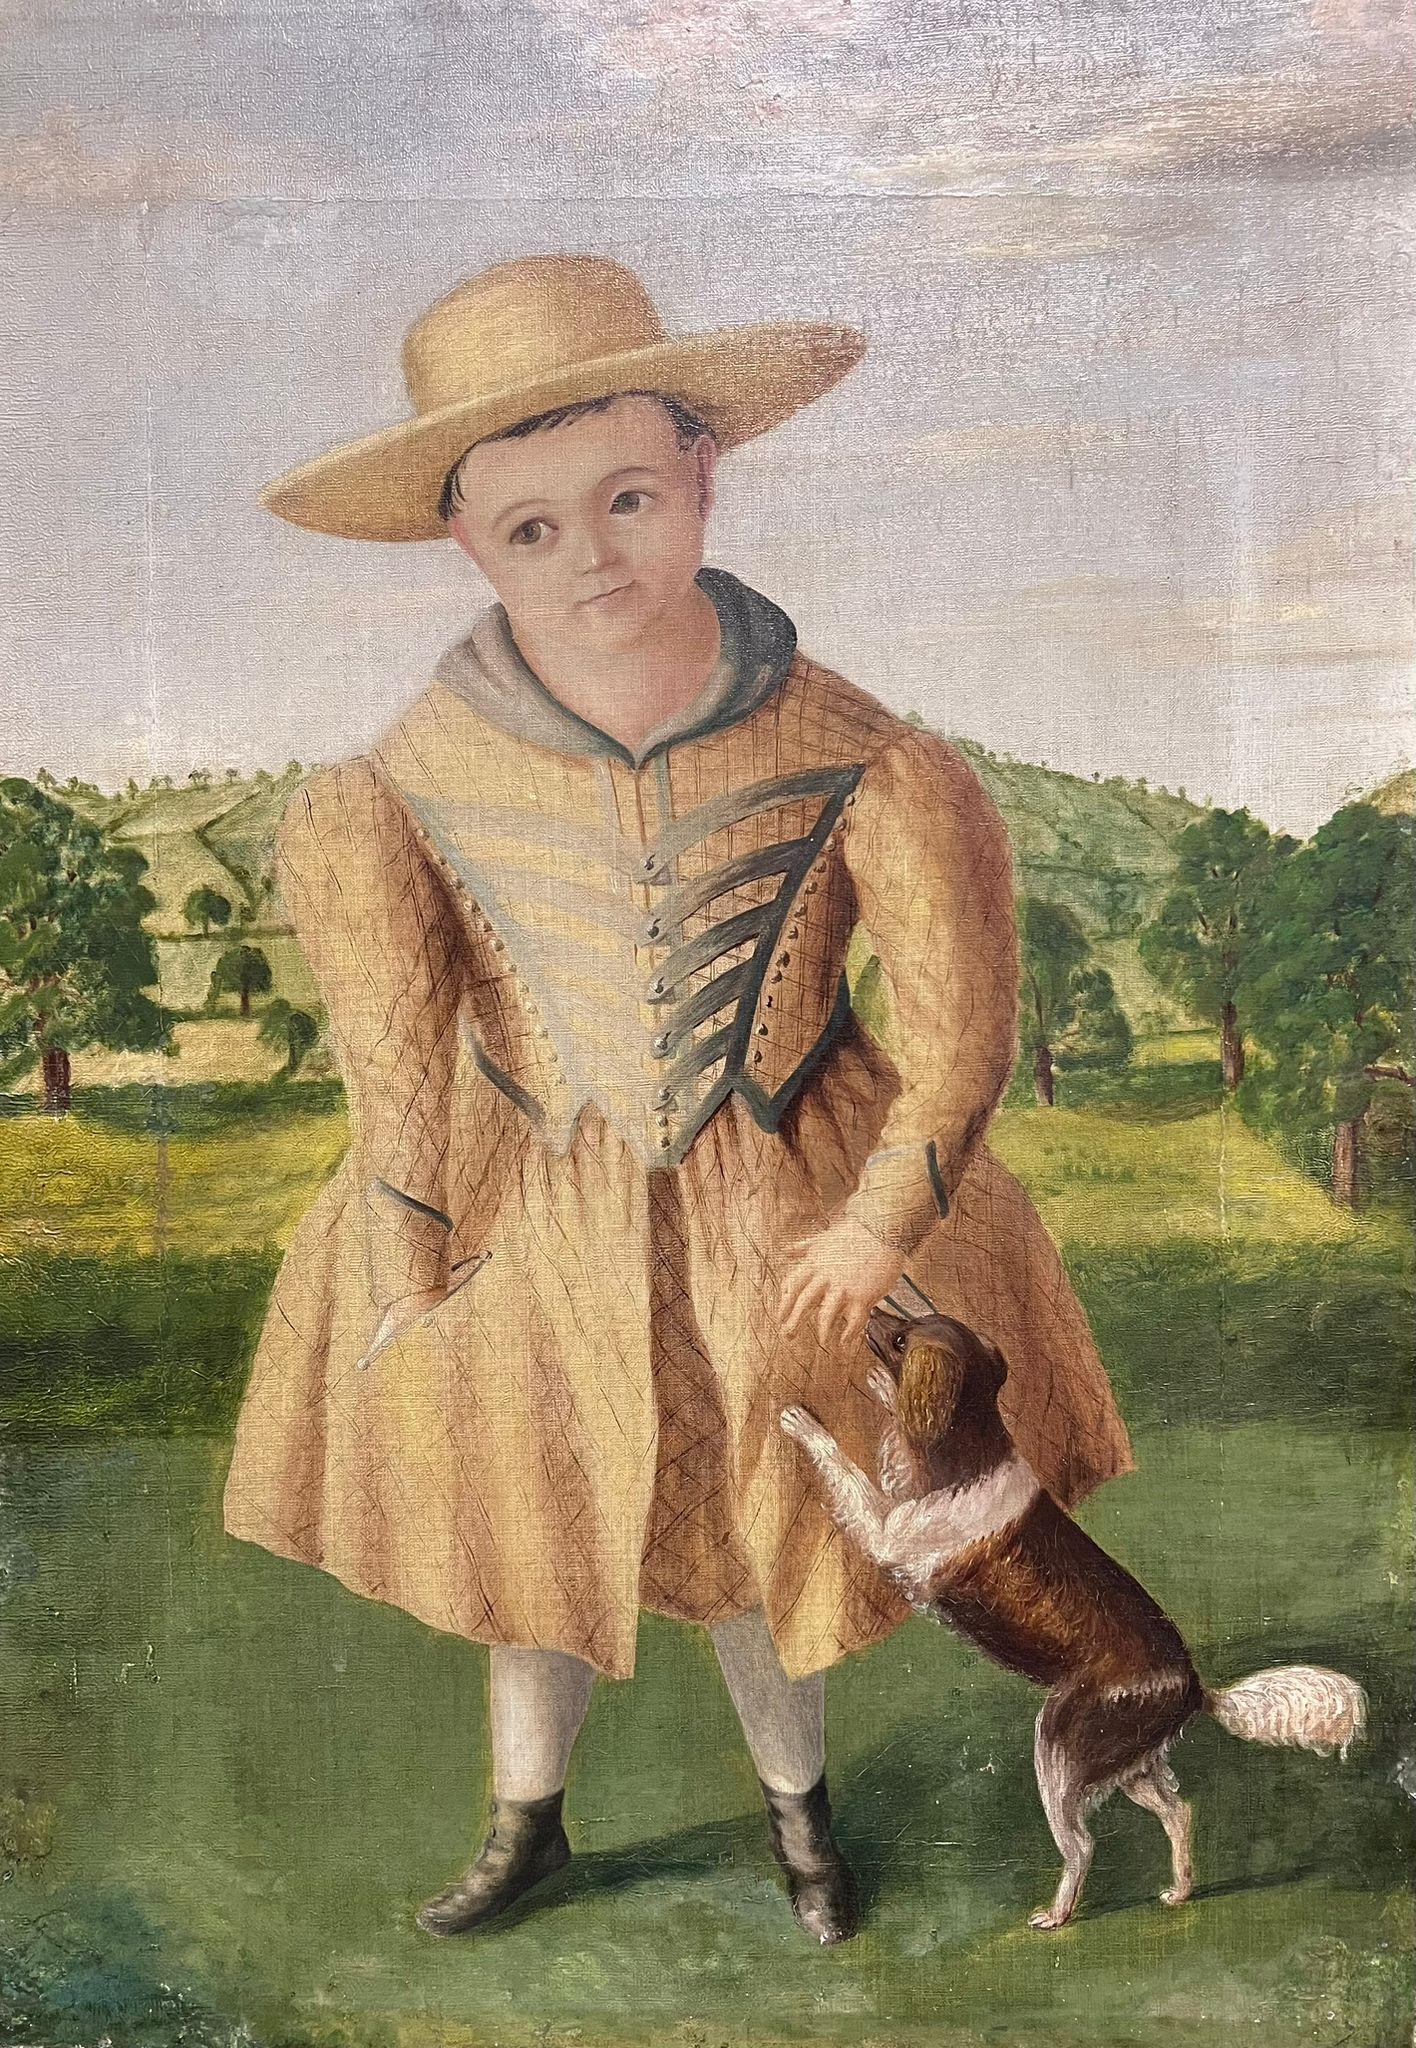 19th century American Folk Art Animal Painting - Mid 19th Century American Folk Art Portrait of Child with Dog in Landscape, Oil